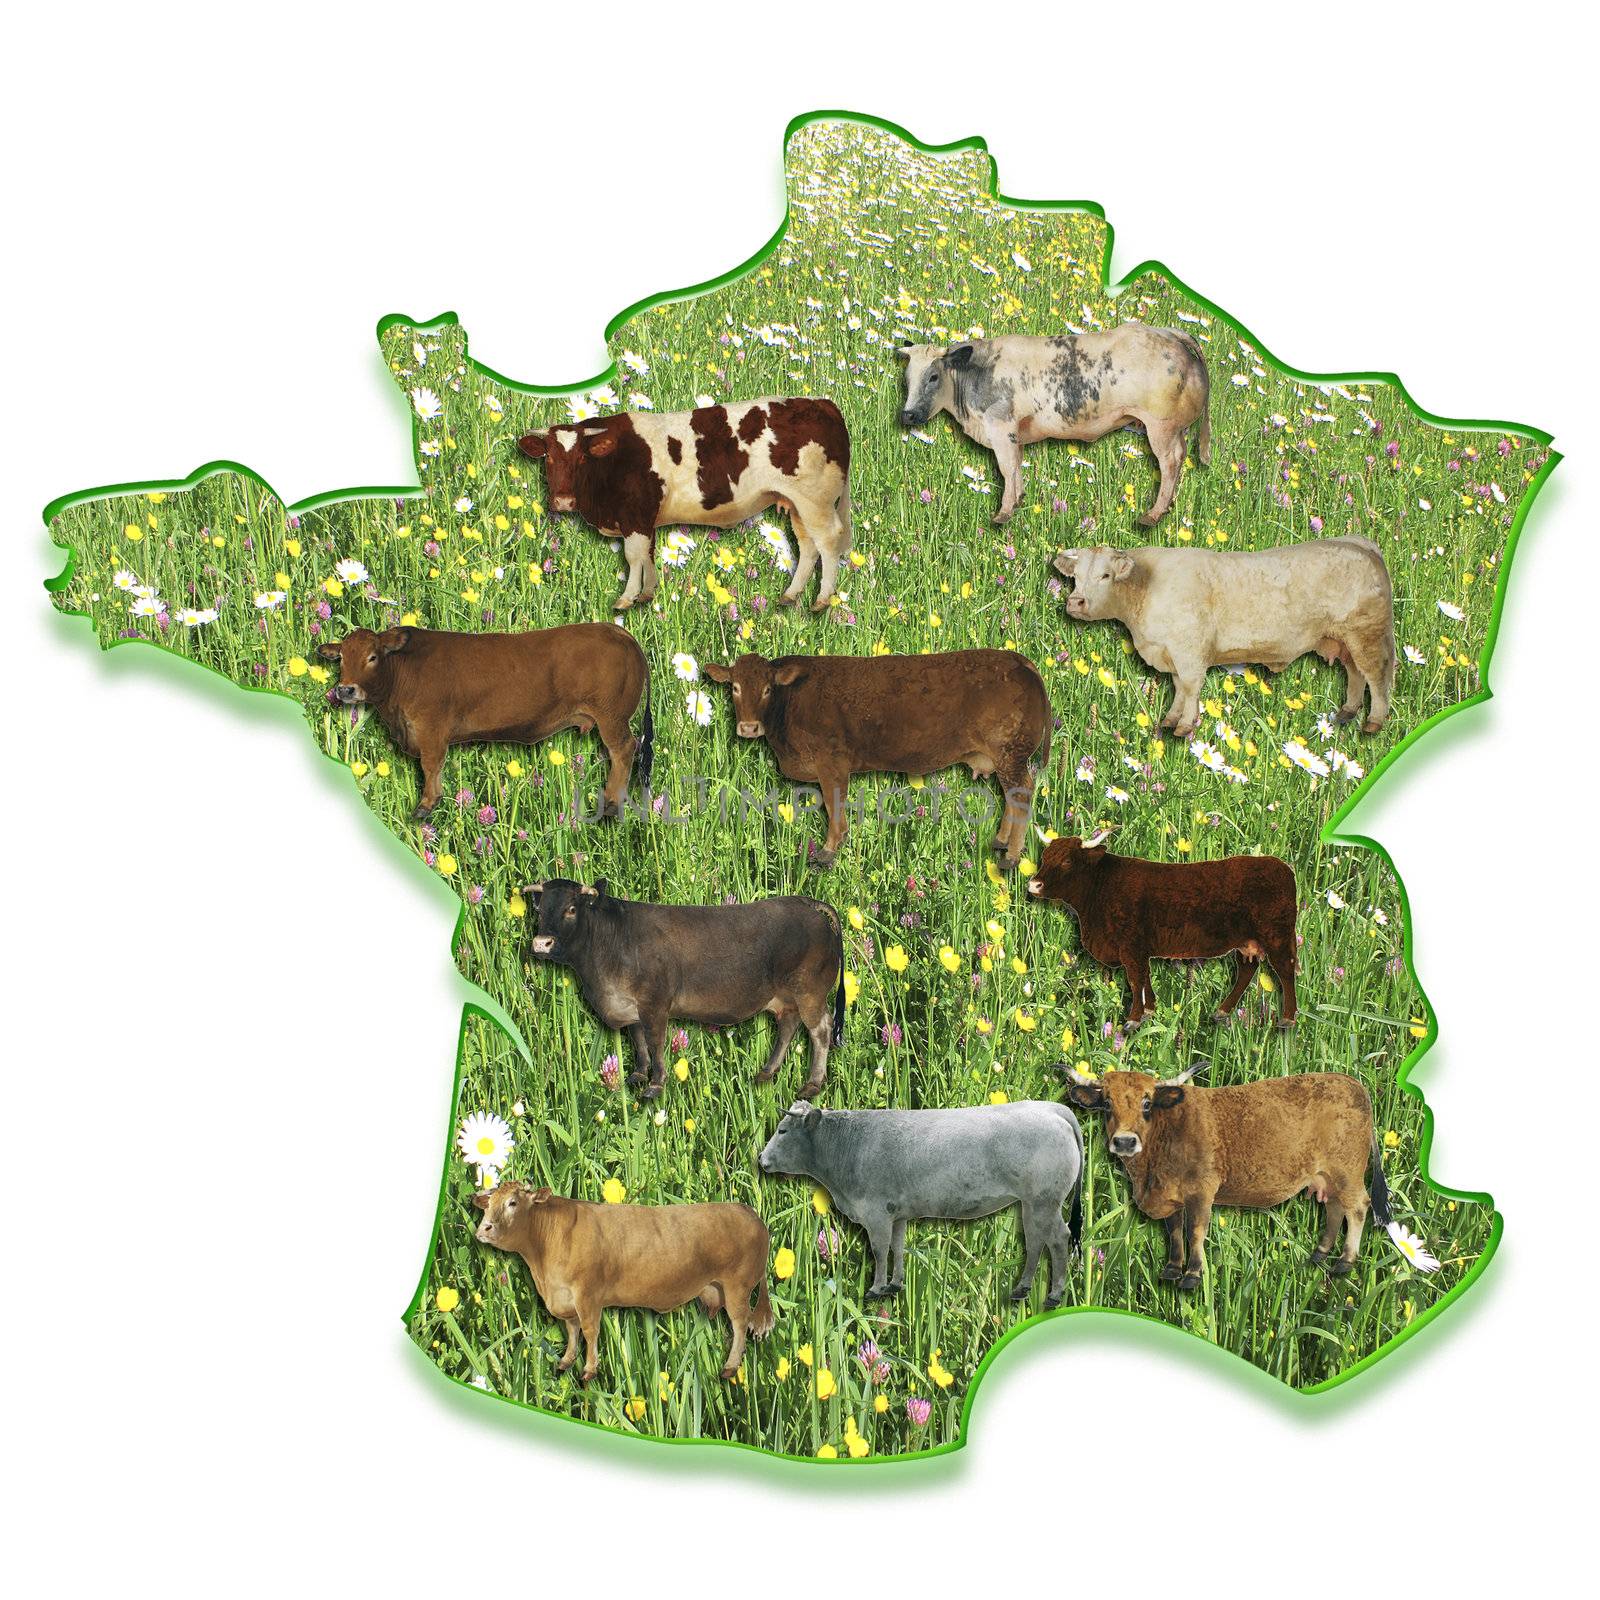 cows in a meadow on a map of France in relief